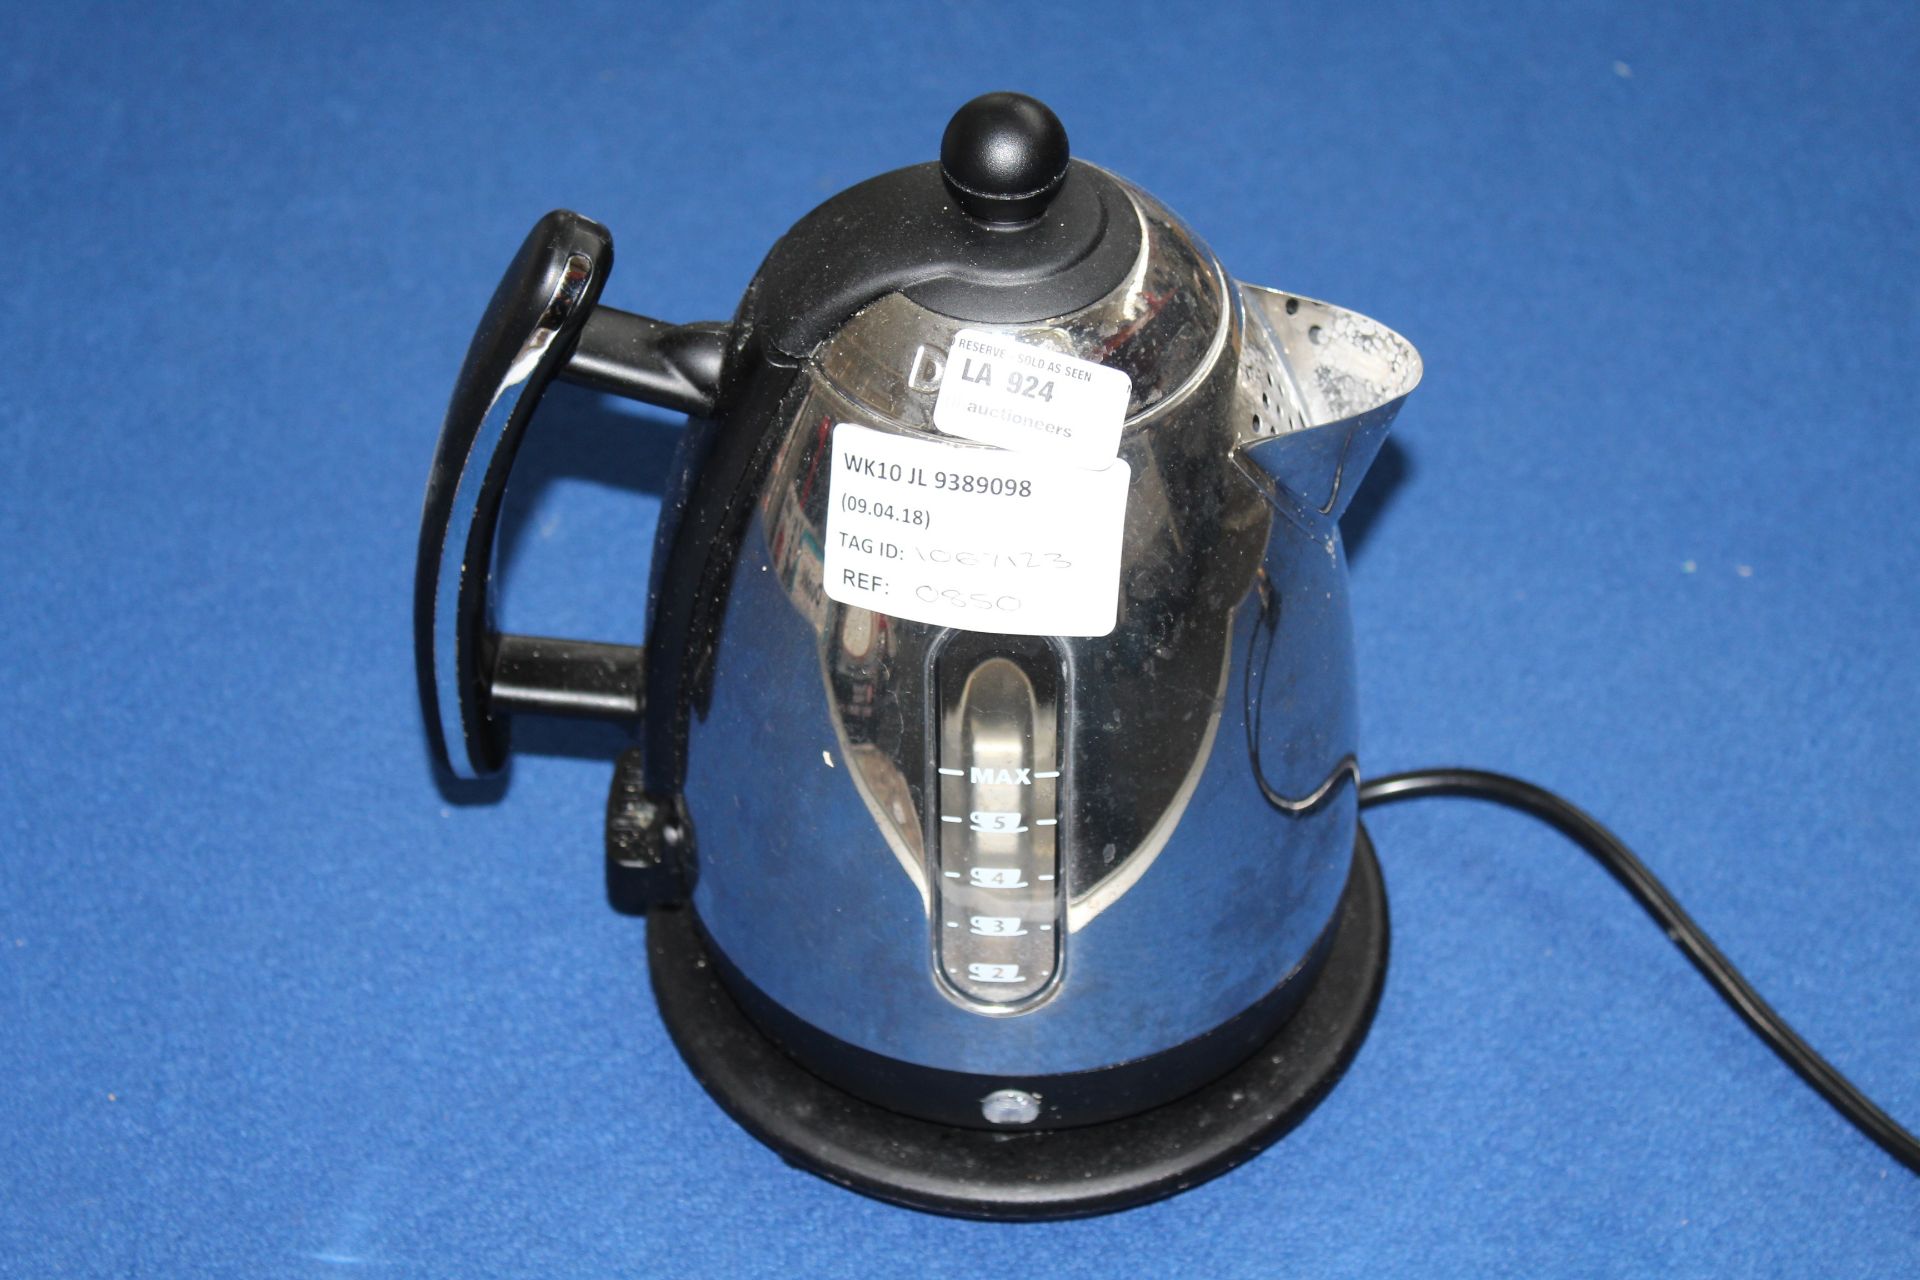 1 x DUALIT KETTLE IN CHROME RRP £85 (09.04.18) *PLEASE NOTE THAT THE BID PRICE IS MULTIPLIED BY